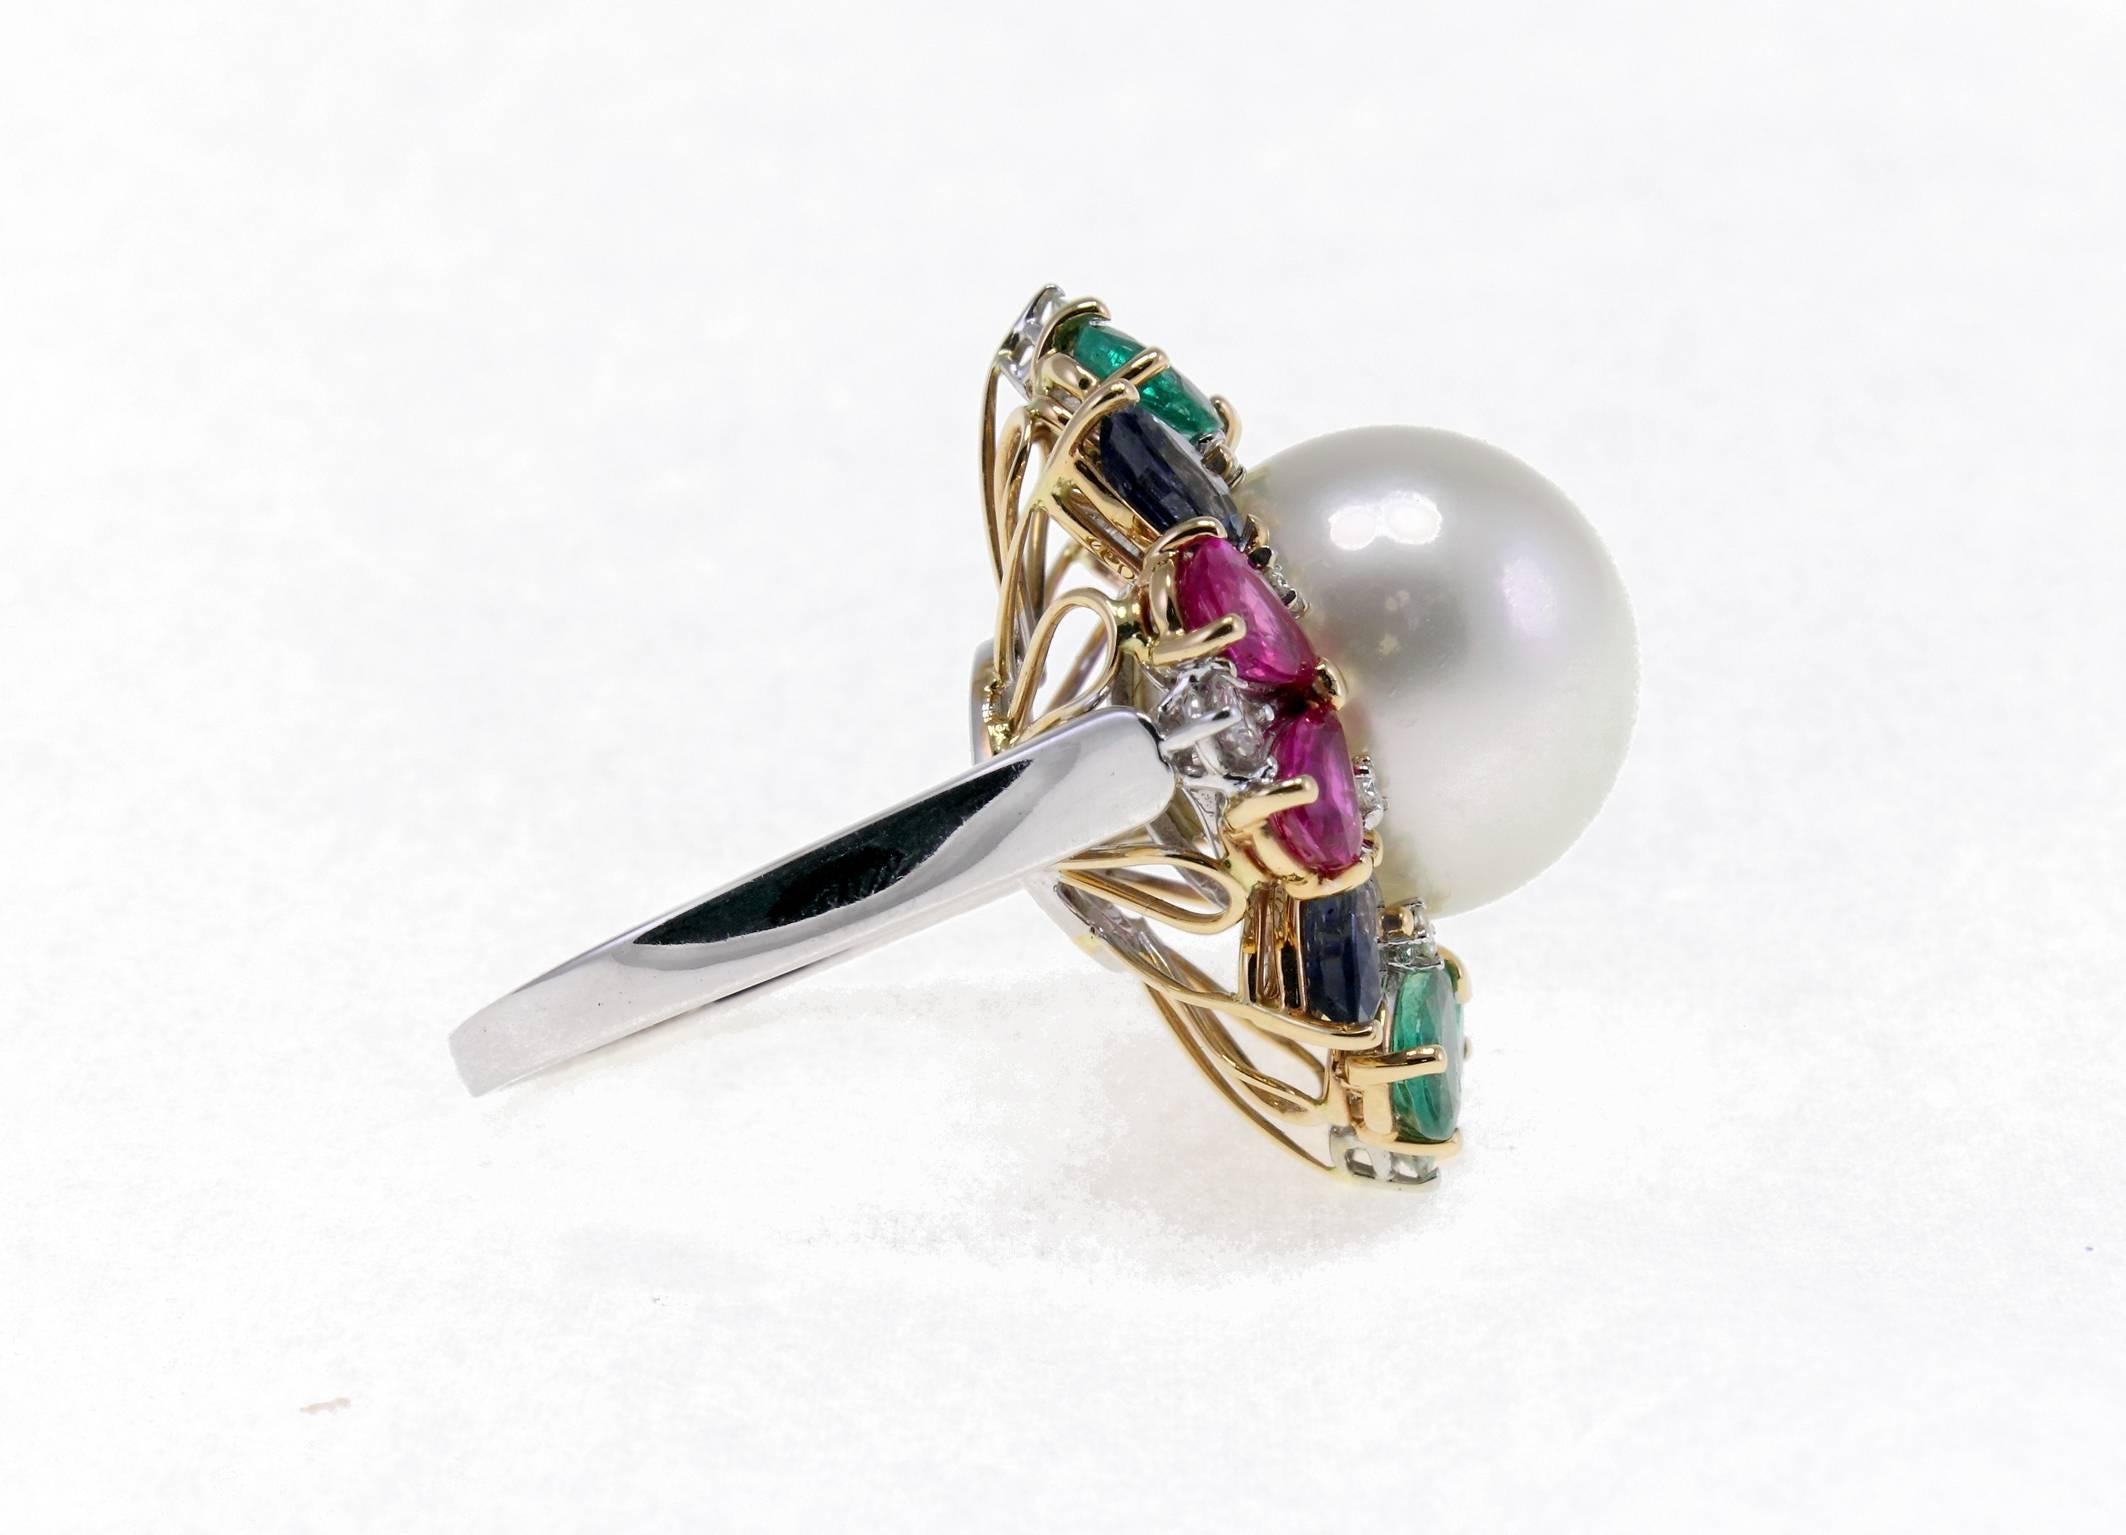 Classic cluster ring in 14K white and rose gold structure composed of a central australian white pearl (4.30 g) surrounded by 0.45 ct of white diamonds, 5.34 ct of intense color rubies, emeralds and blue sapphires drops.
Diamonds 0.45 ct 
Rubies,